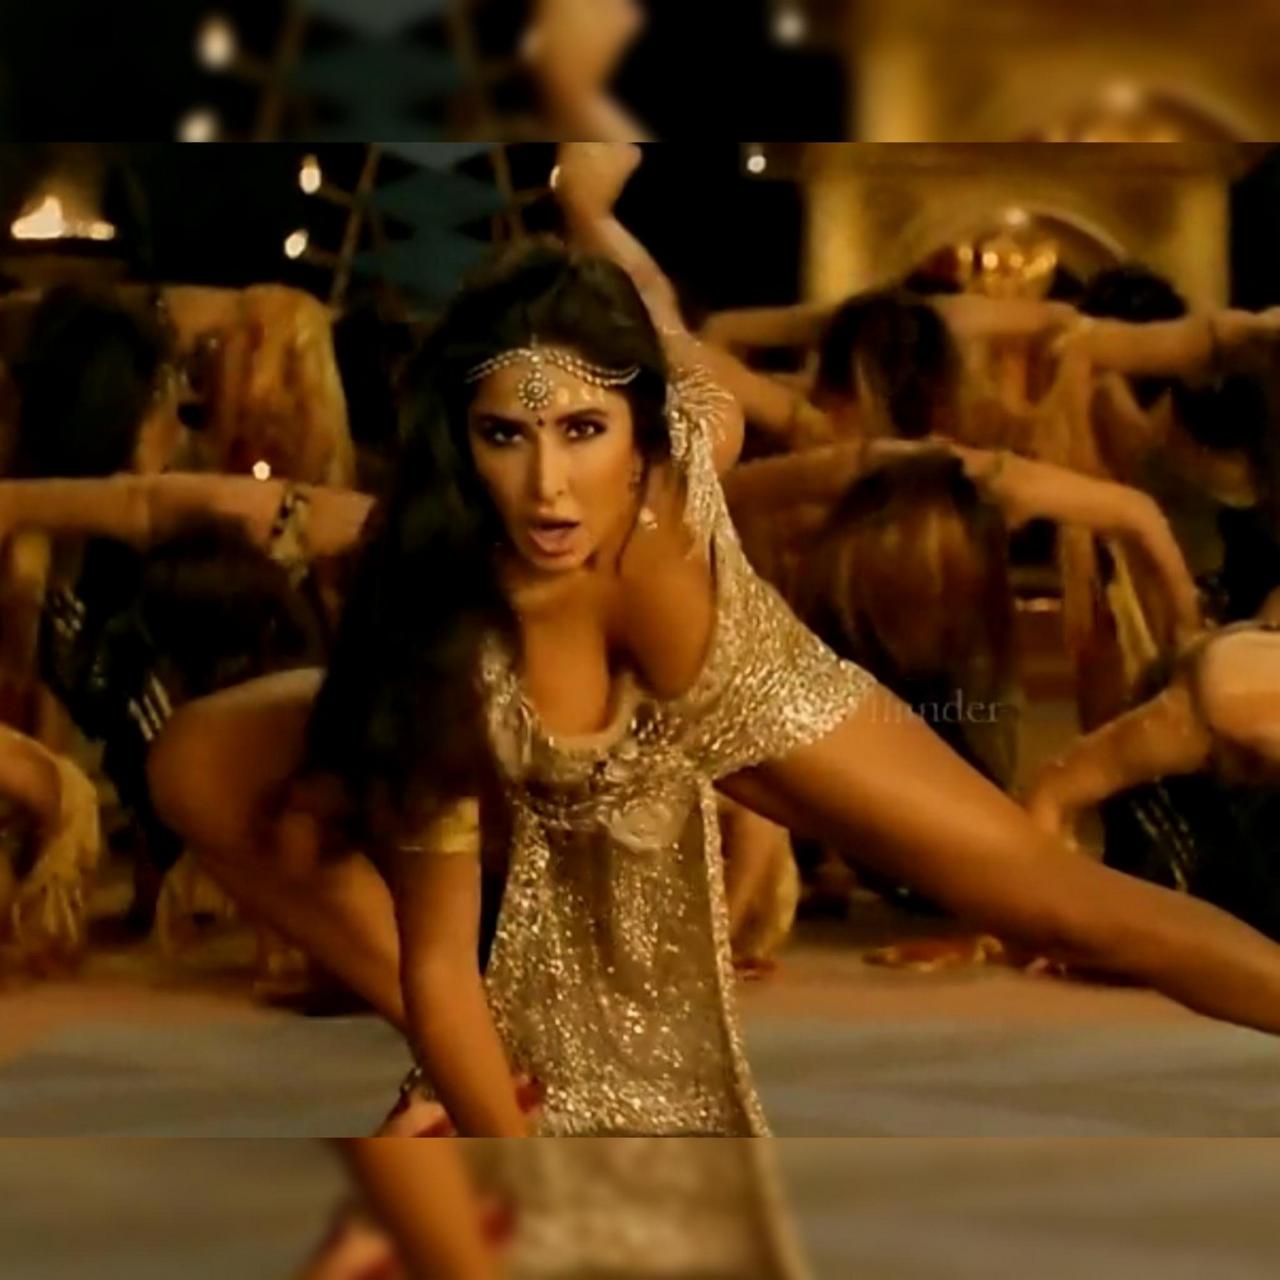 Katrina Kaif Giving A Nice View Of Her Twins Disclaimer Snapshot Of Her Video Song In A Movie NSFW